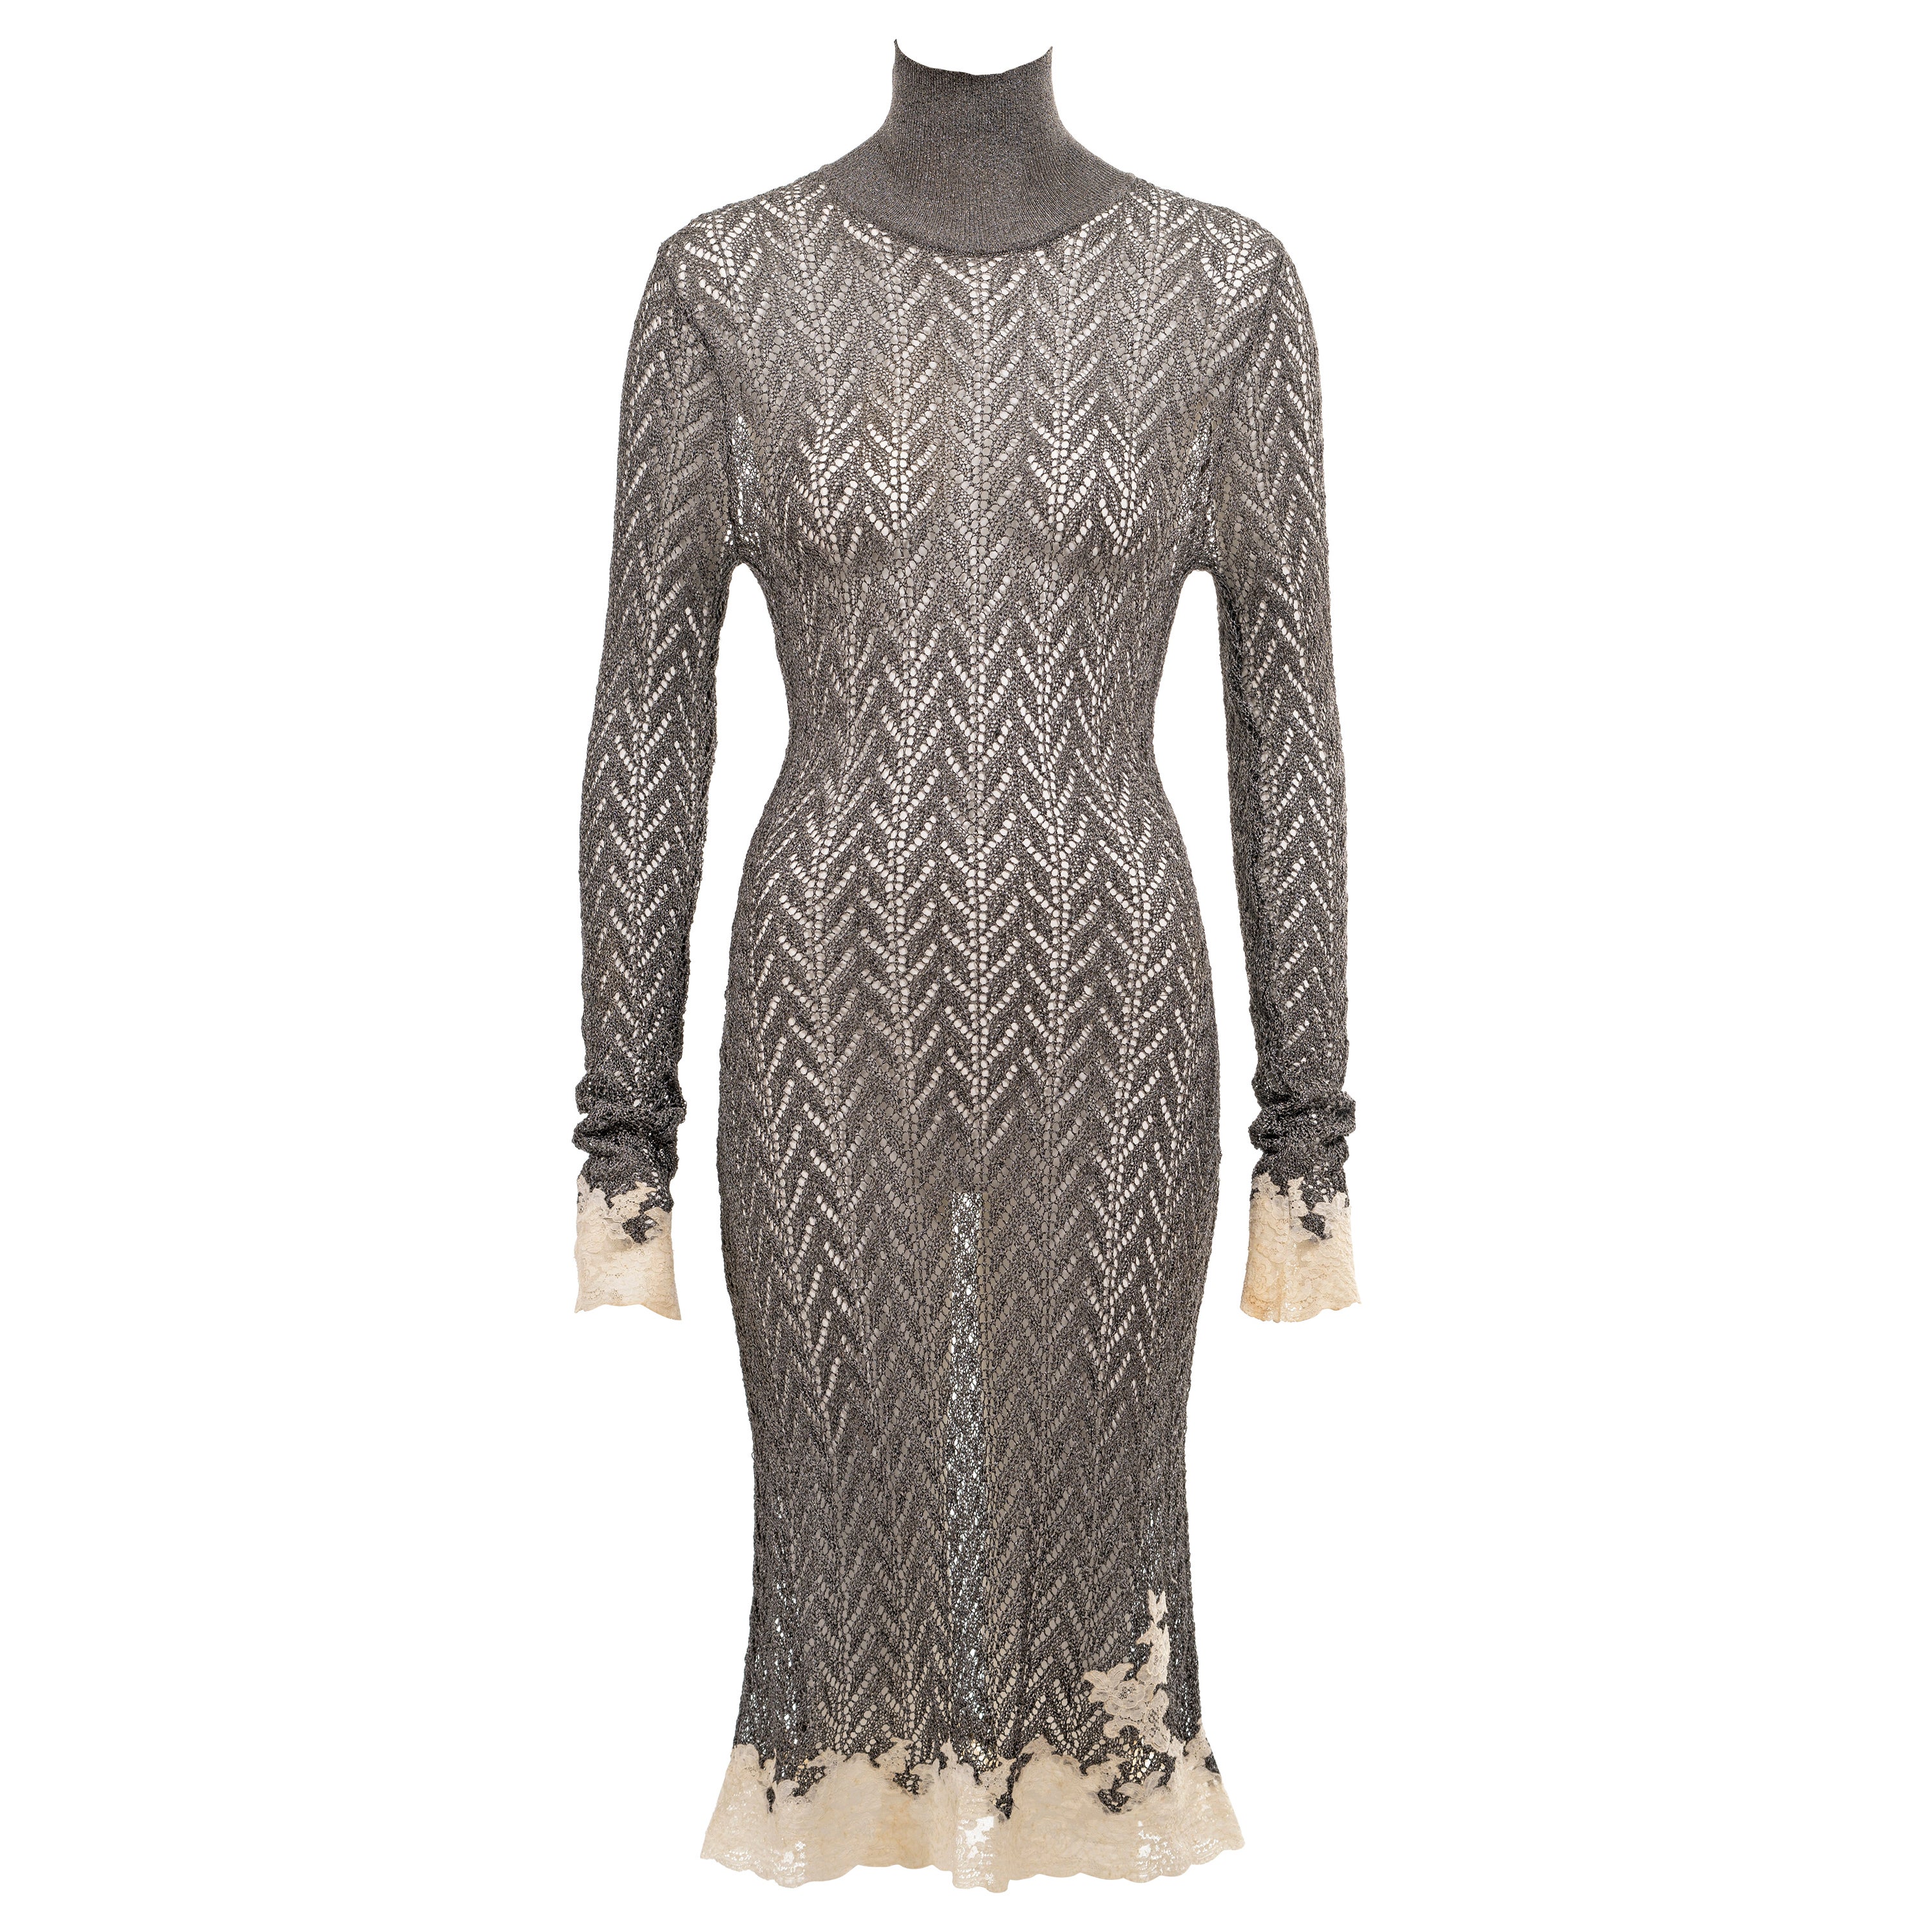 Christian Dior by John Galliano silver open-knit dress with lace trim, fw 1998 For Sale